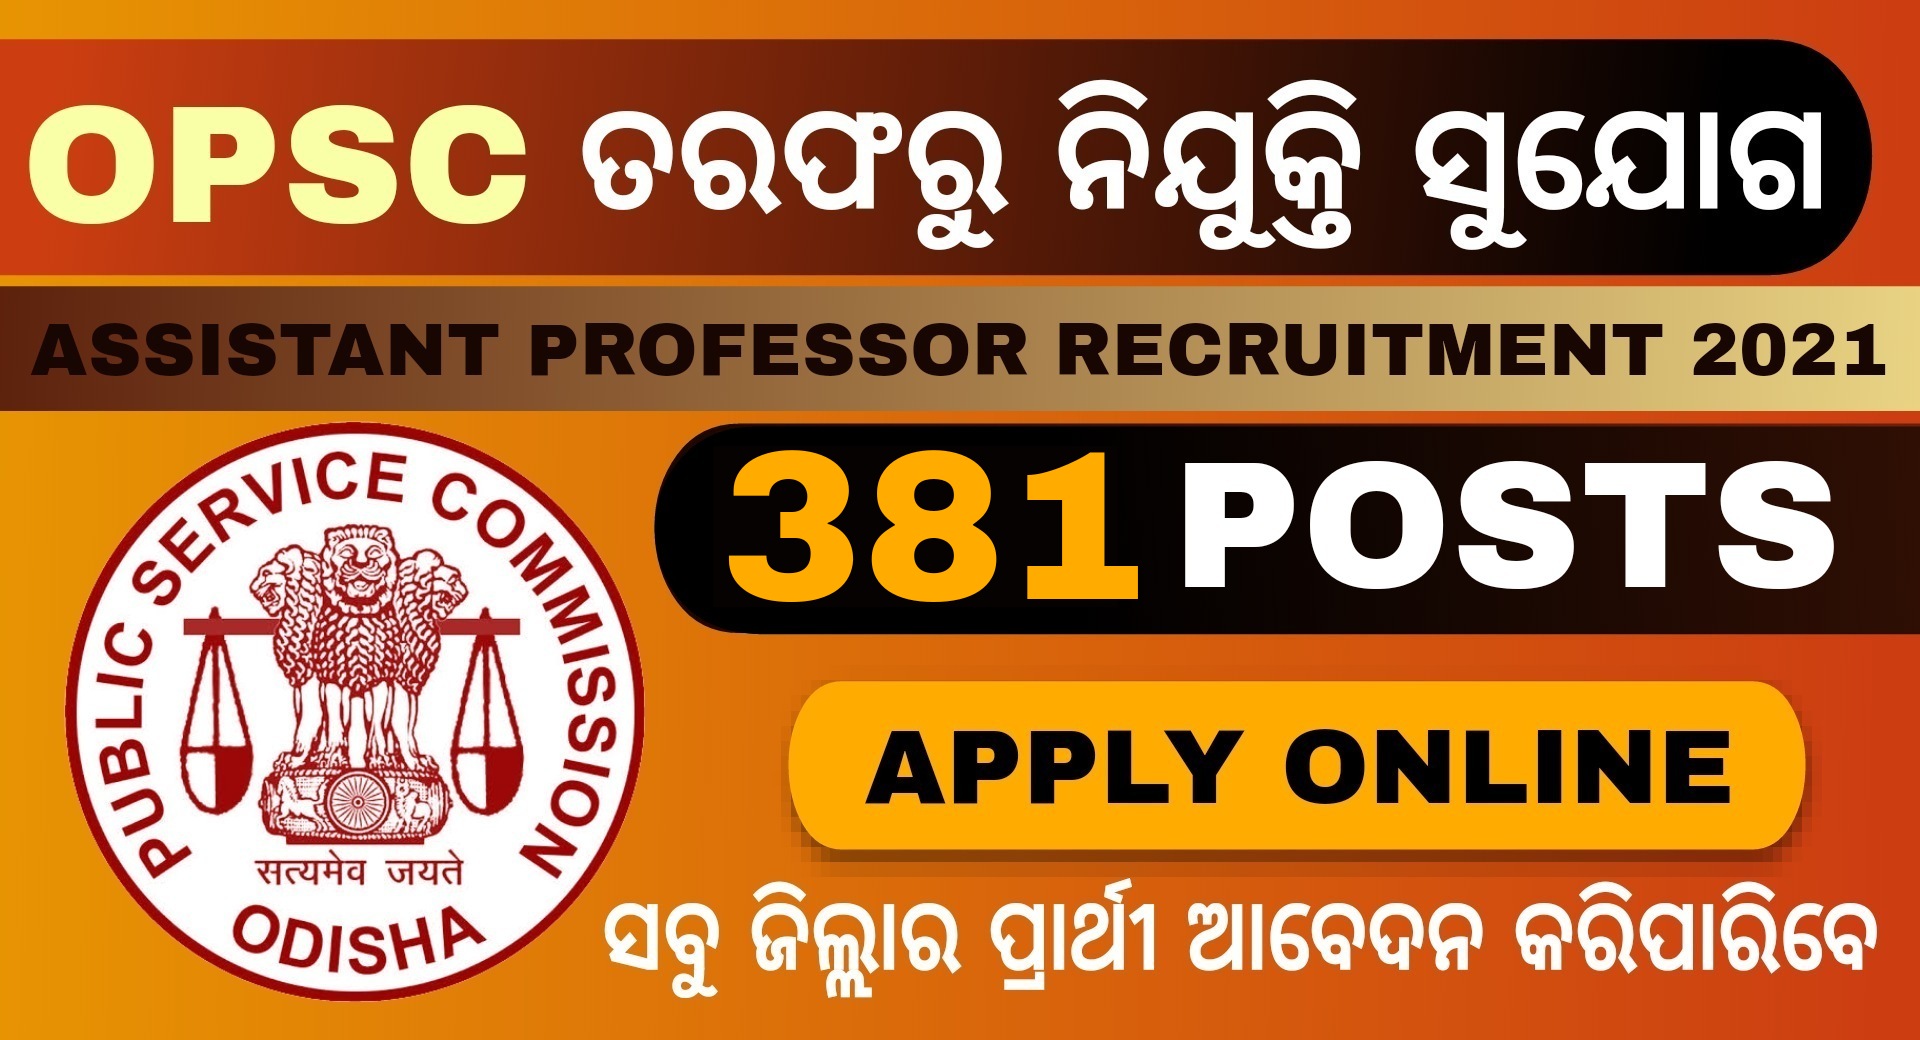 OPSC Assistant Professors Recruitment 2021- Apply for 381 Posts